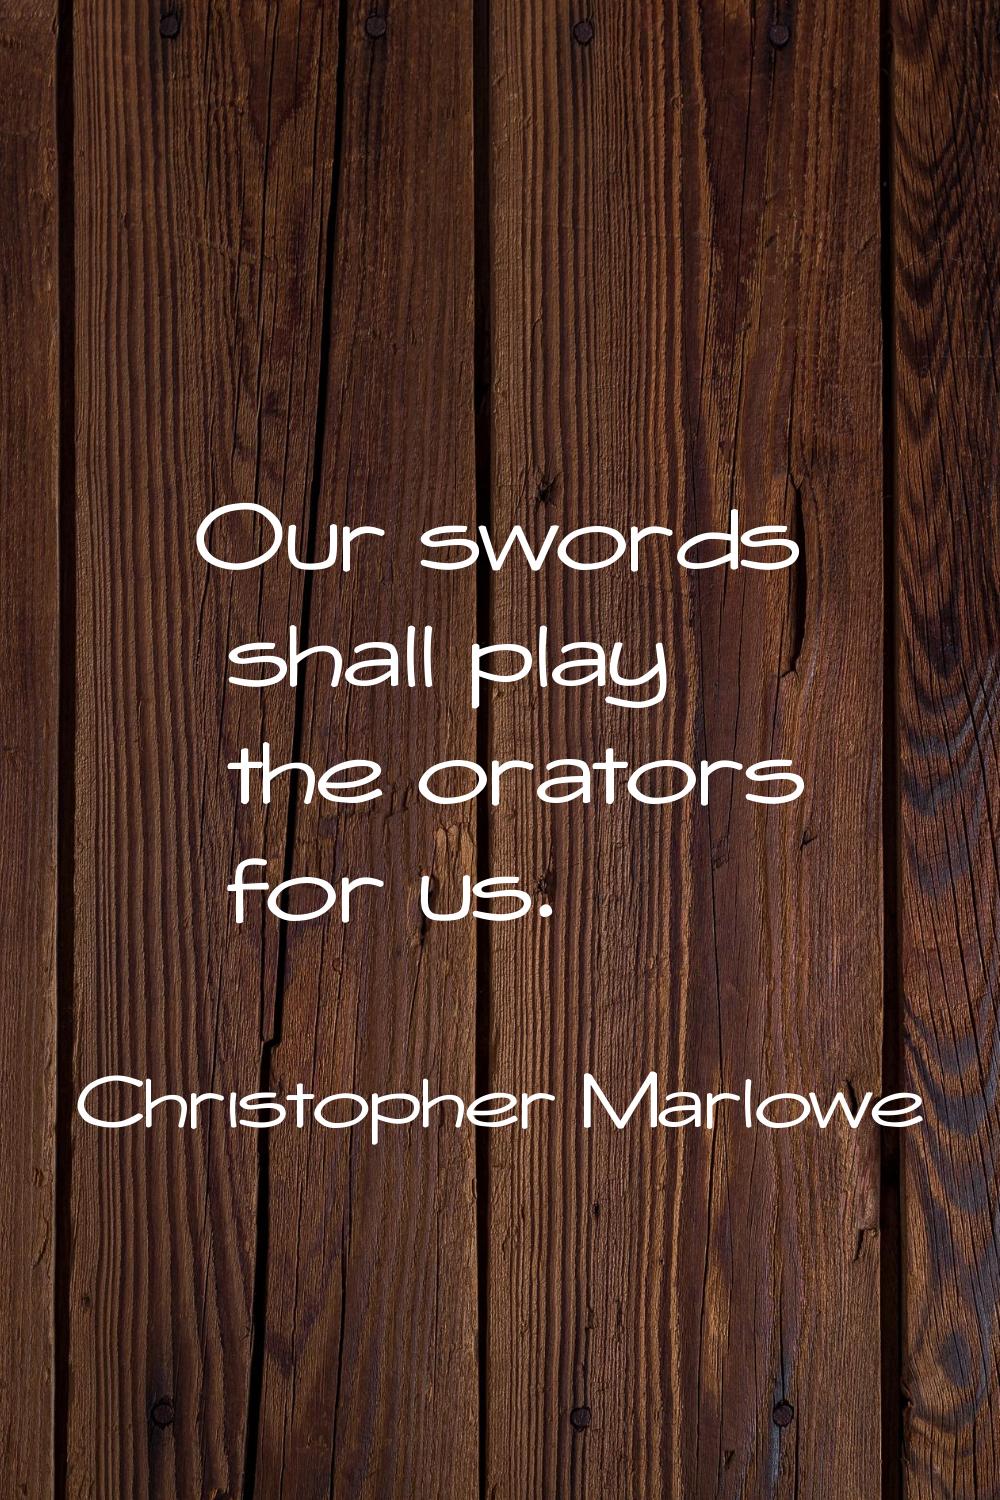 Our swords shall play the orators for us.